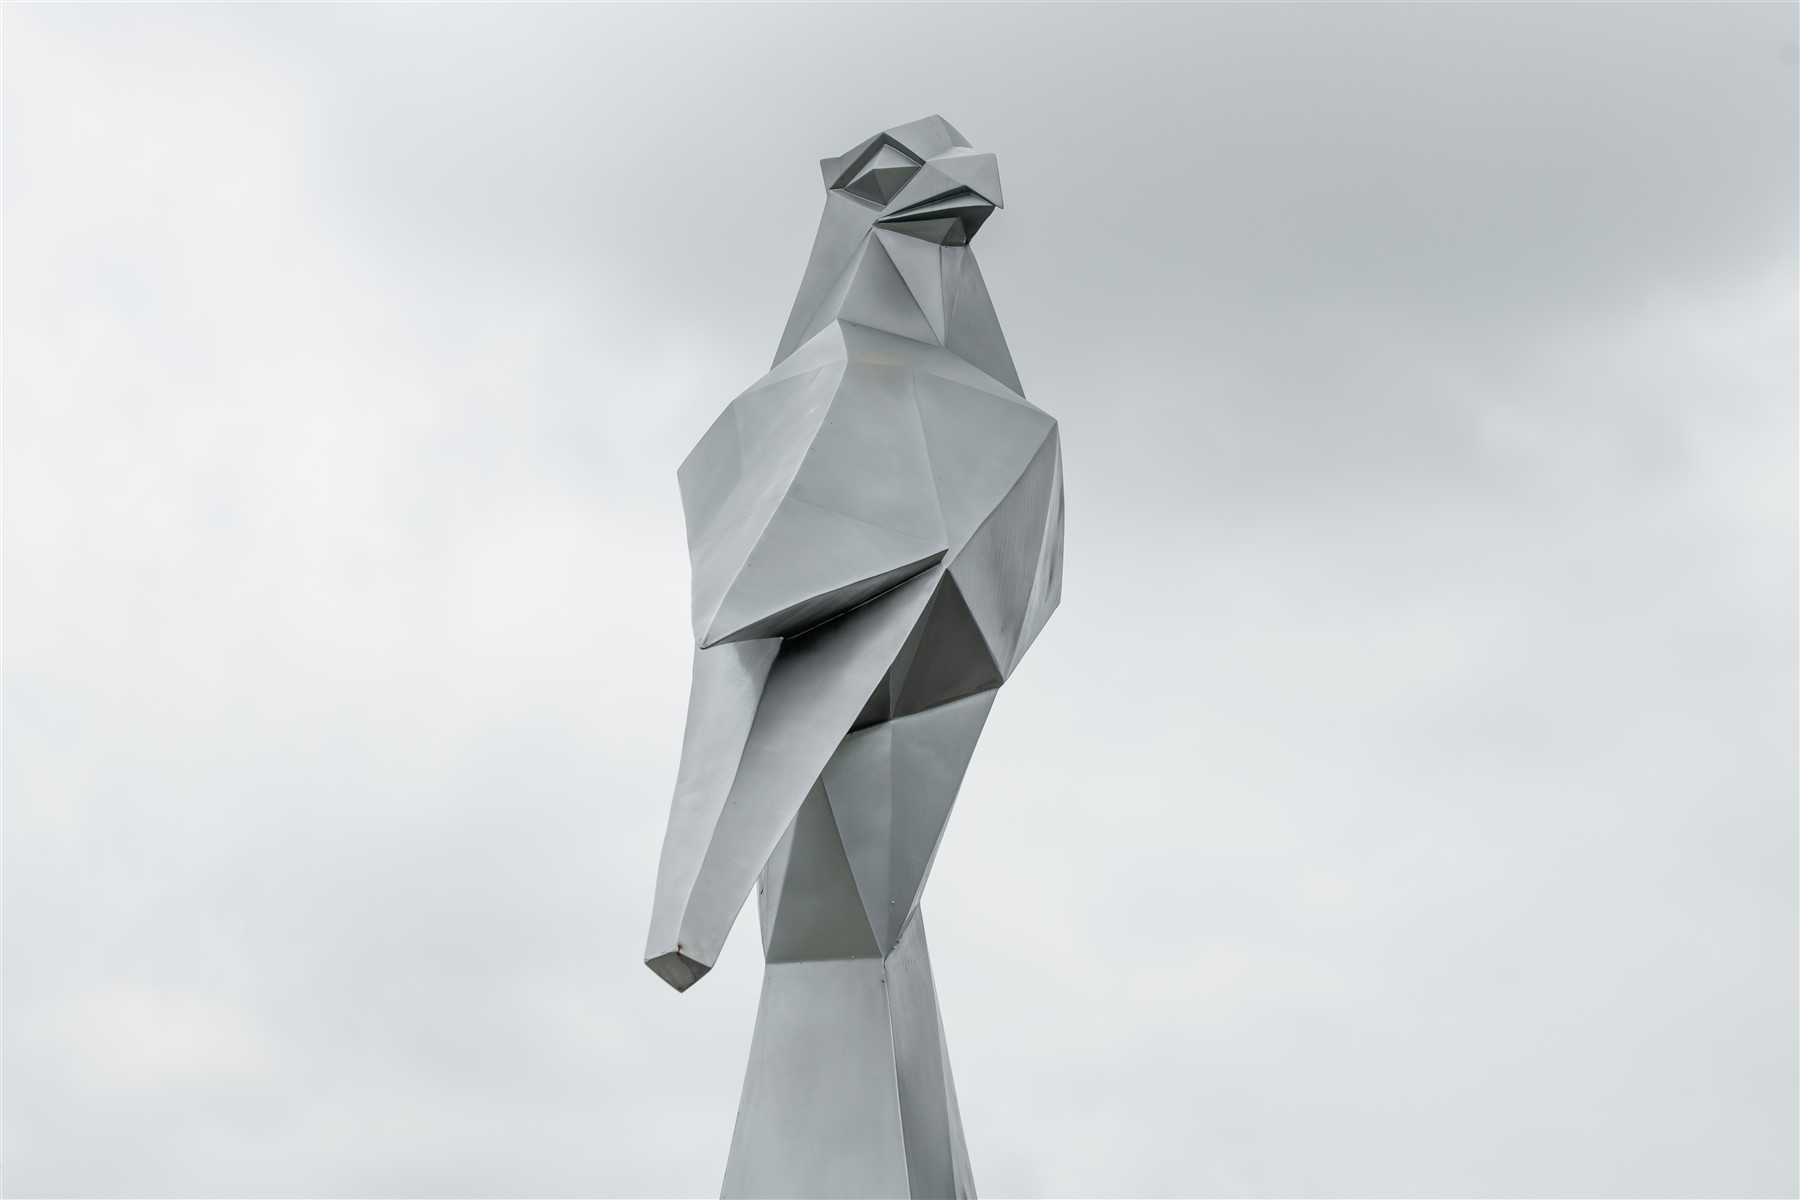 Falcon Stainless Steel Sculpture